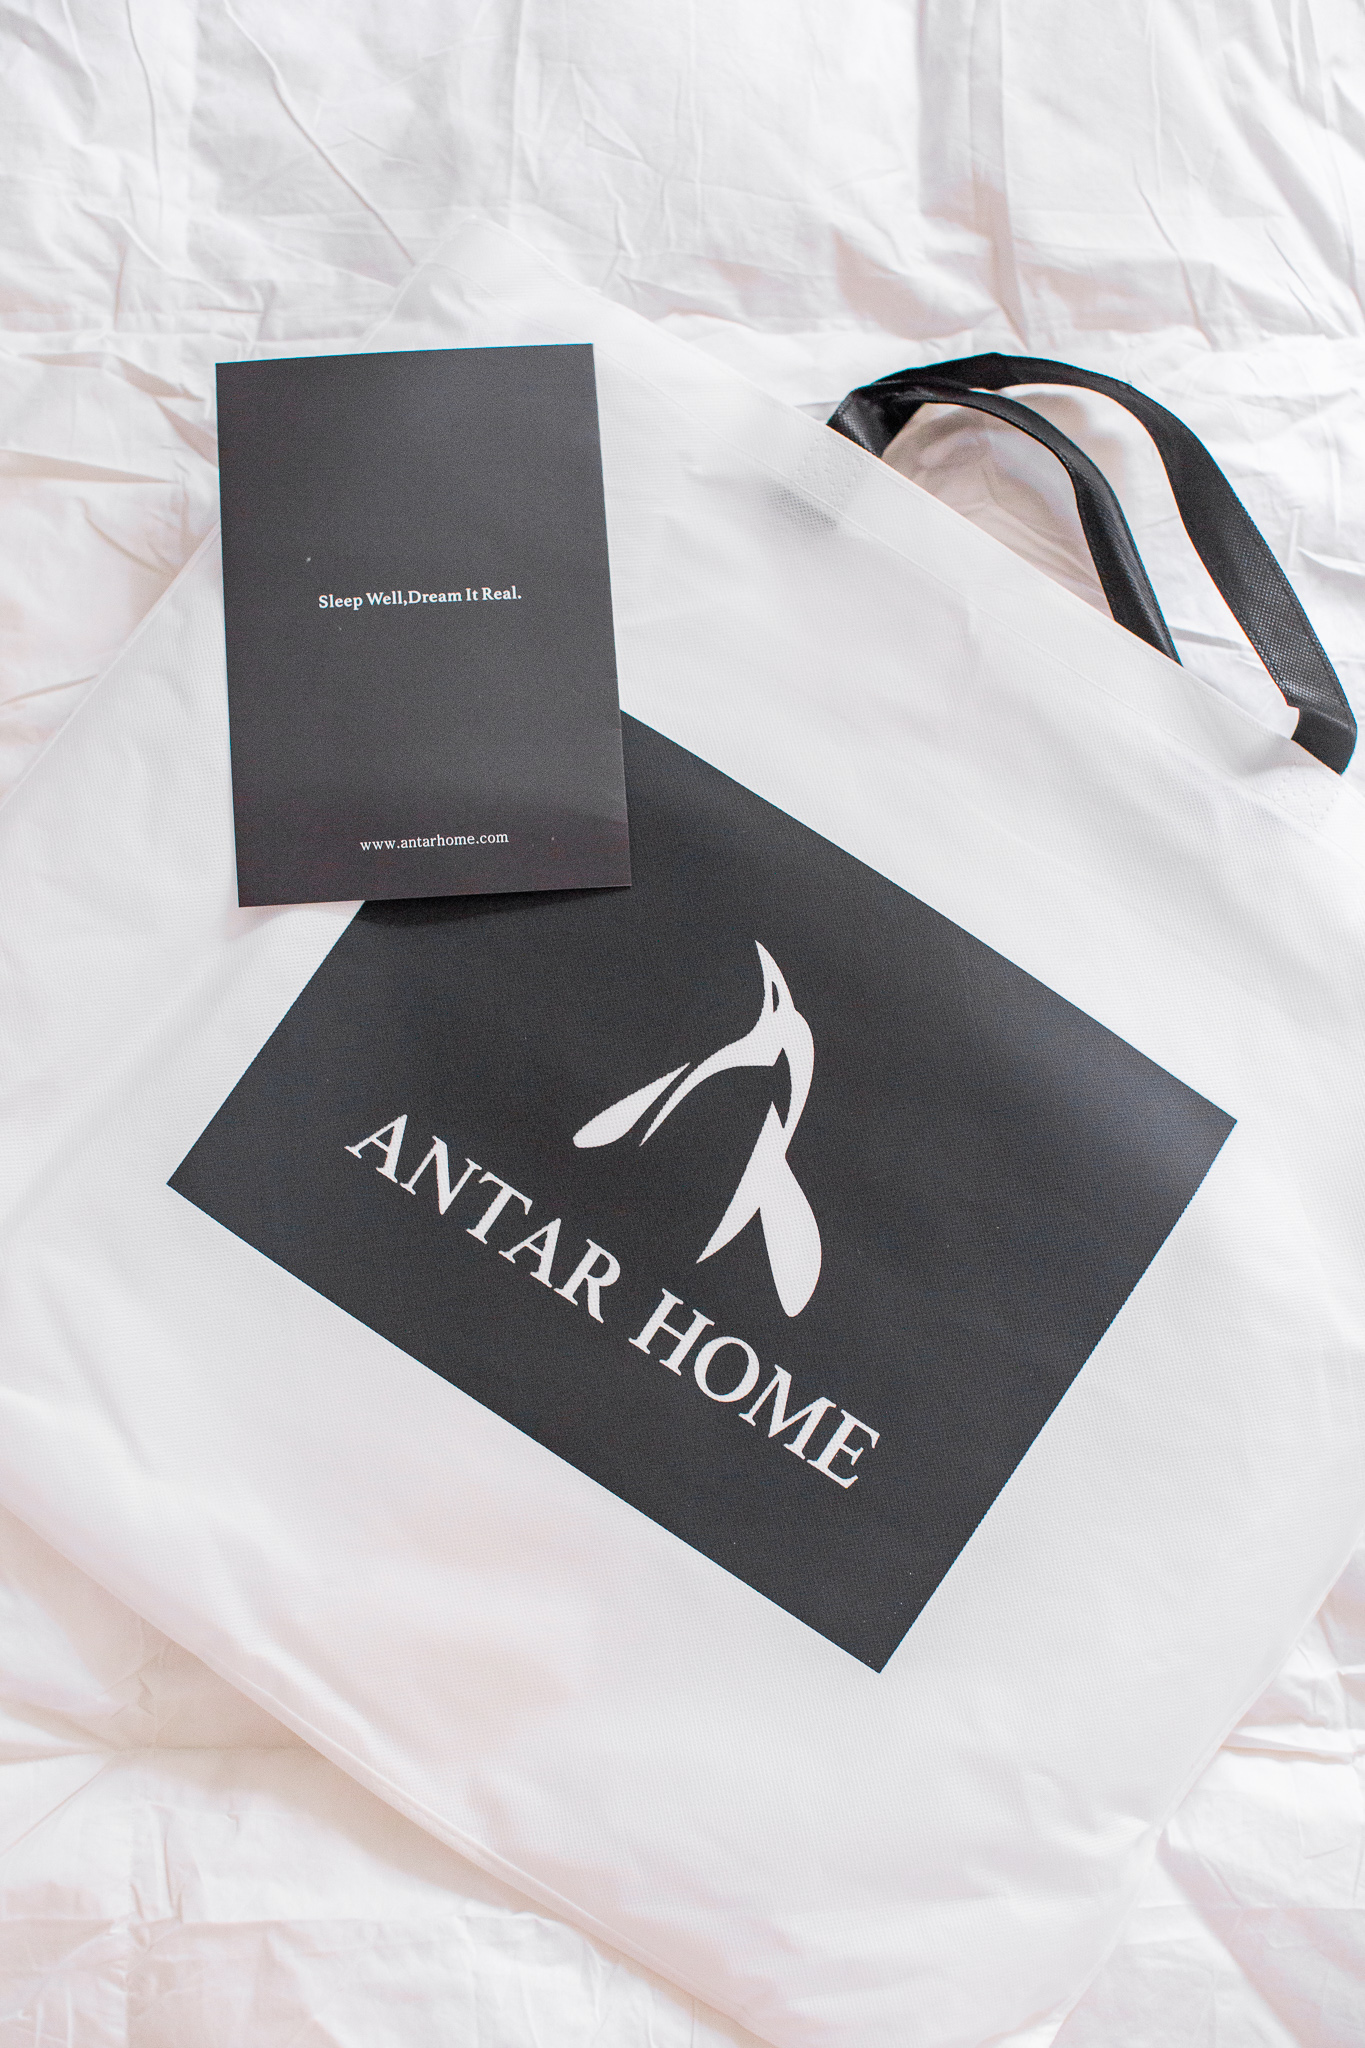 Modern Guest Bedroom Ideas with Antar-Home by popular North Carolina life and style blog, Coffee Beans and Bobby Pins: image of an Antar Home shopping bag on top of a white duvet.